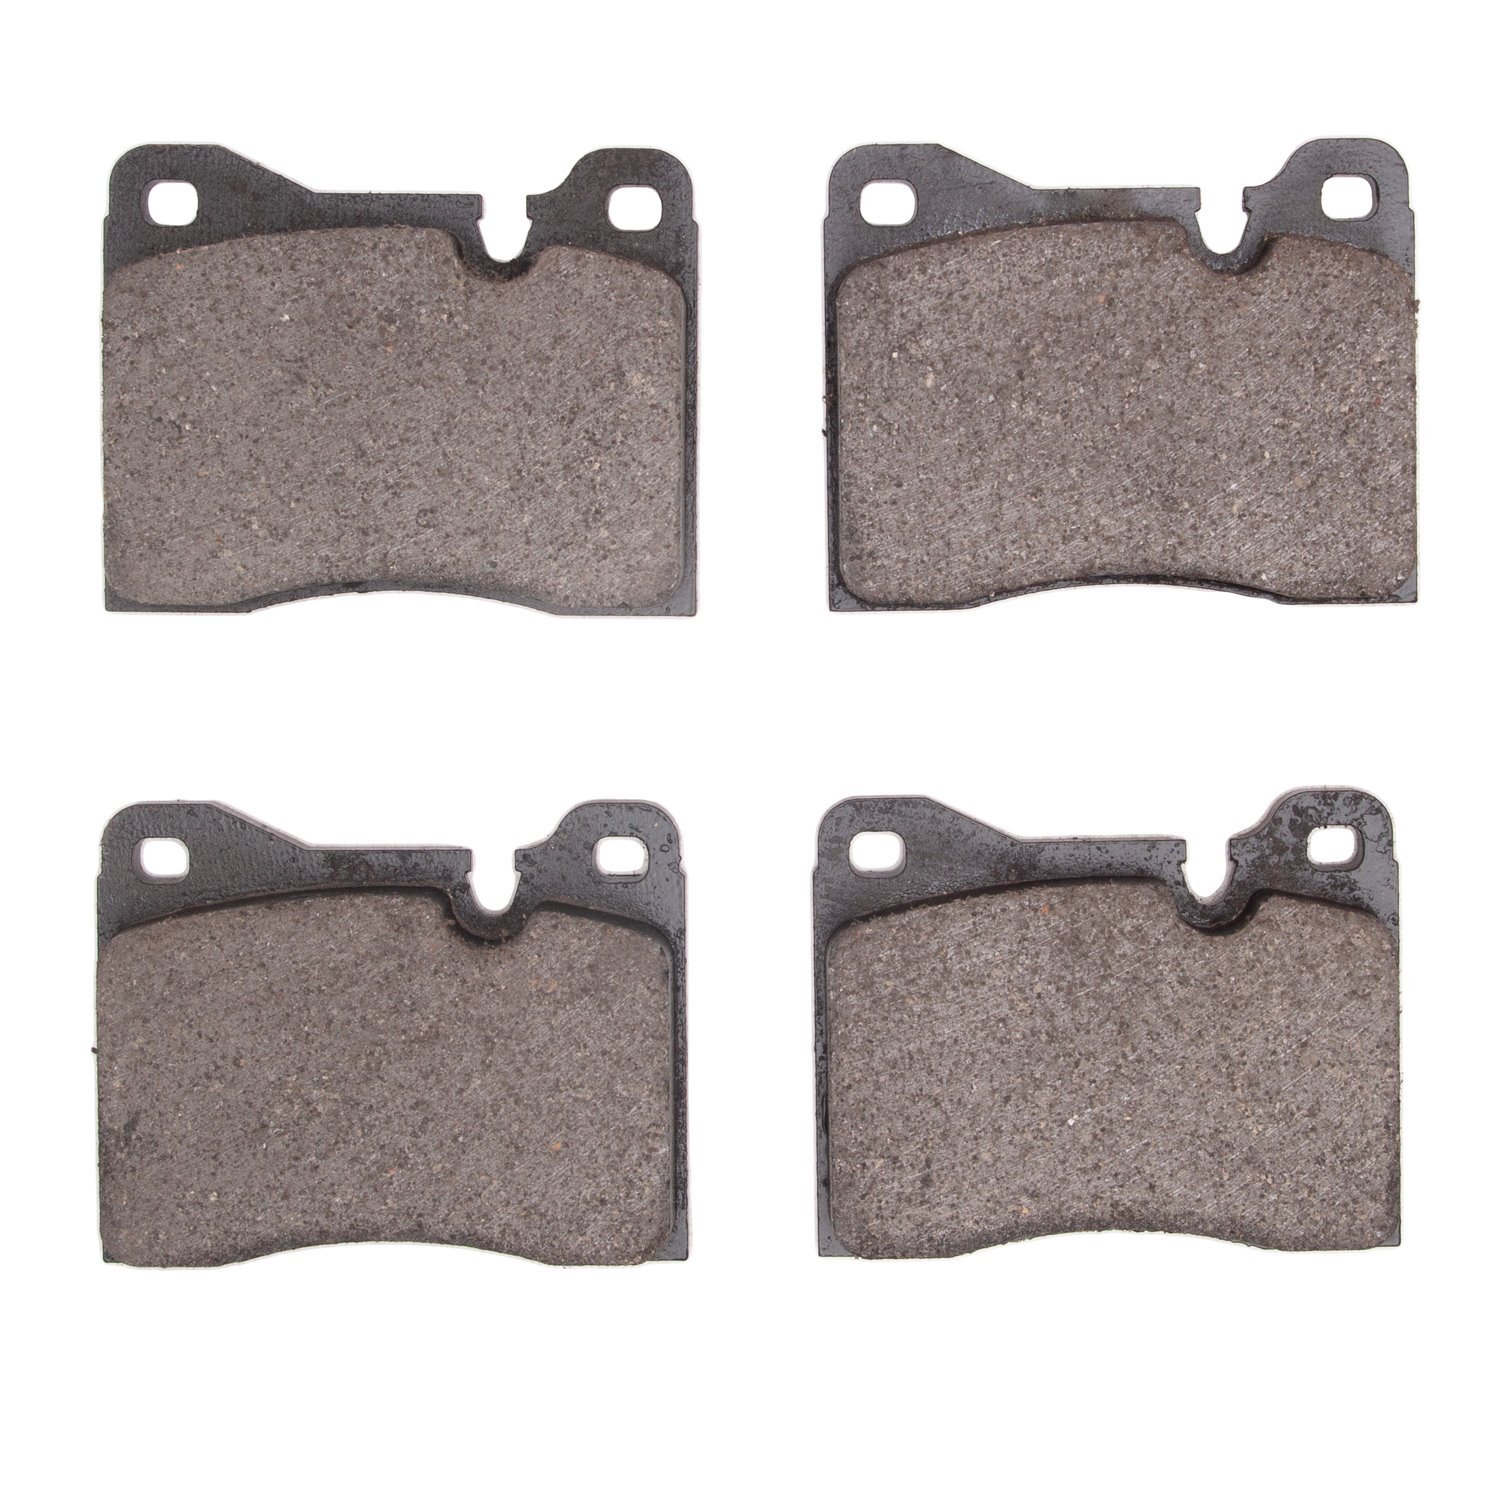 1551-0082-00 5000 Advanced Low-Metallic Brake Pads, 1968-1994 Multiple Makes/Models, Position: Front